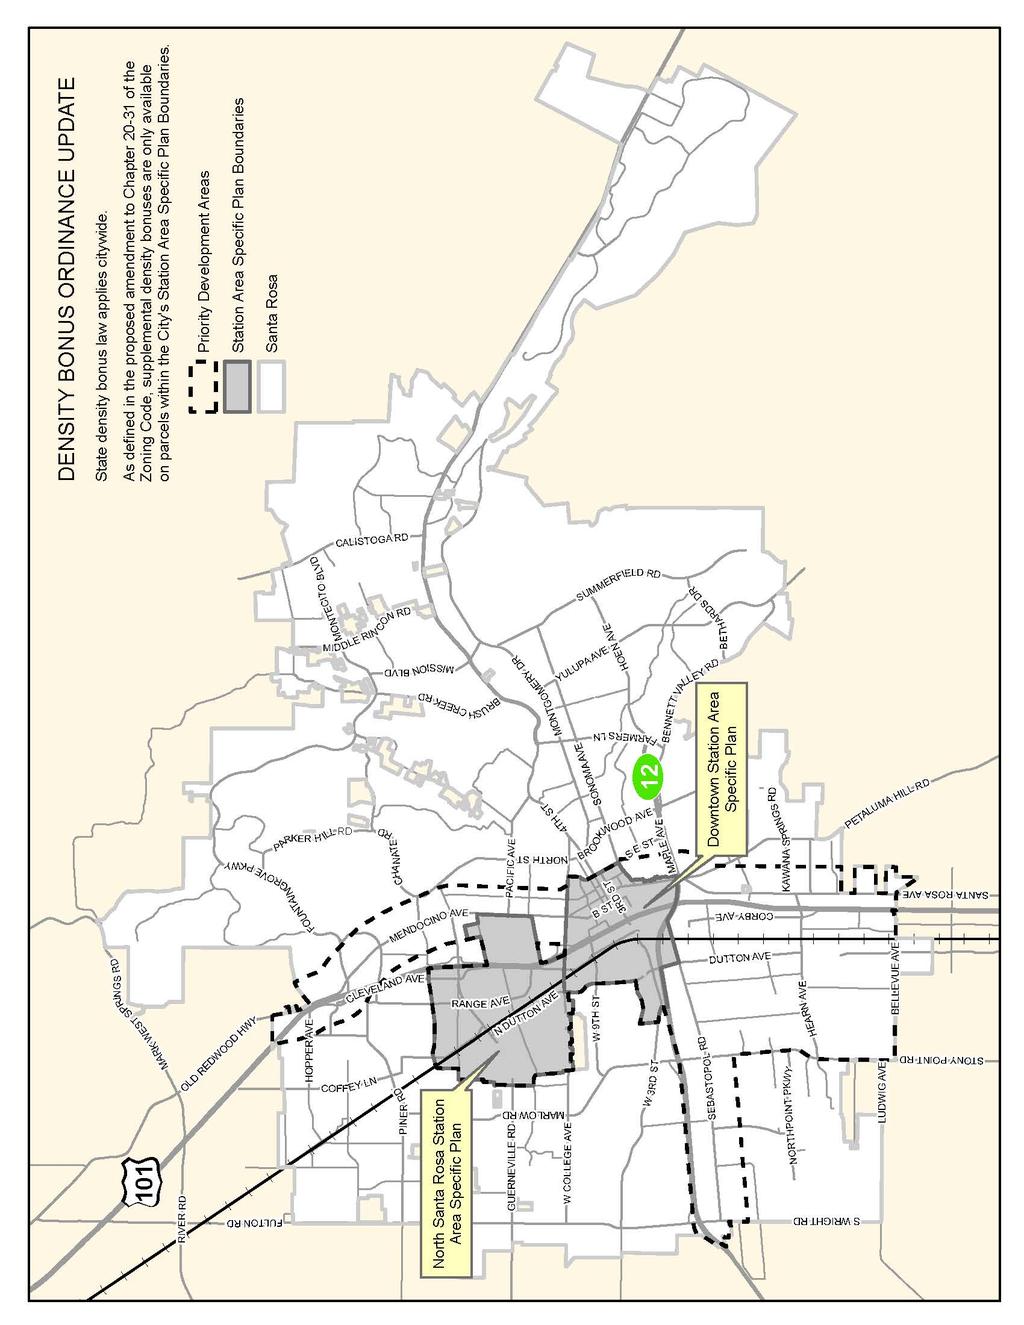 FIGURE 2: DOWNTOWN STATION AREA AND NORTH